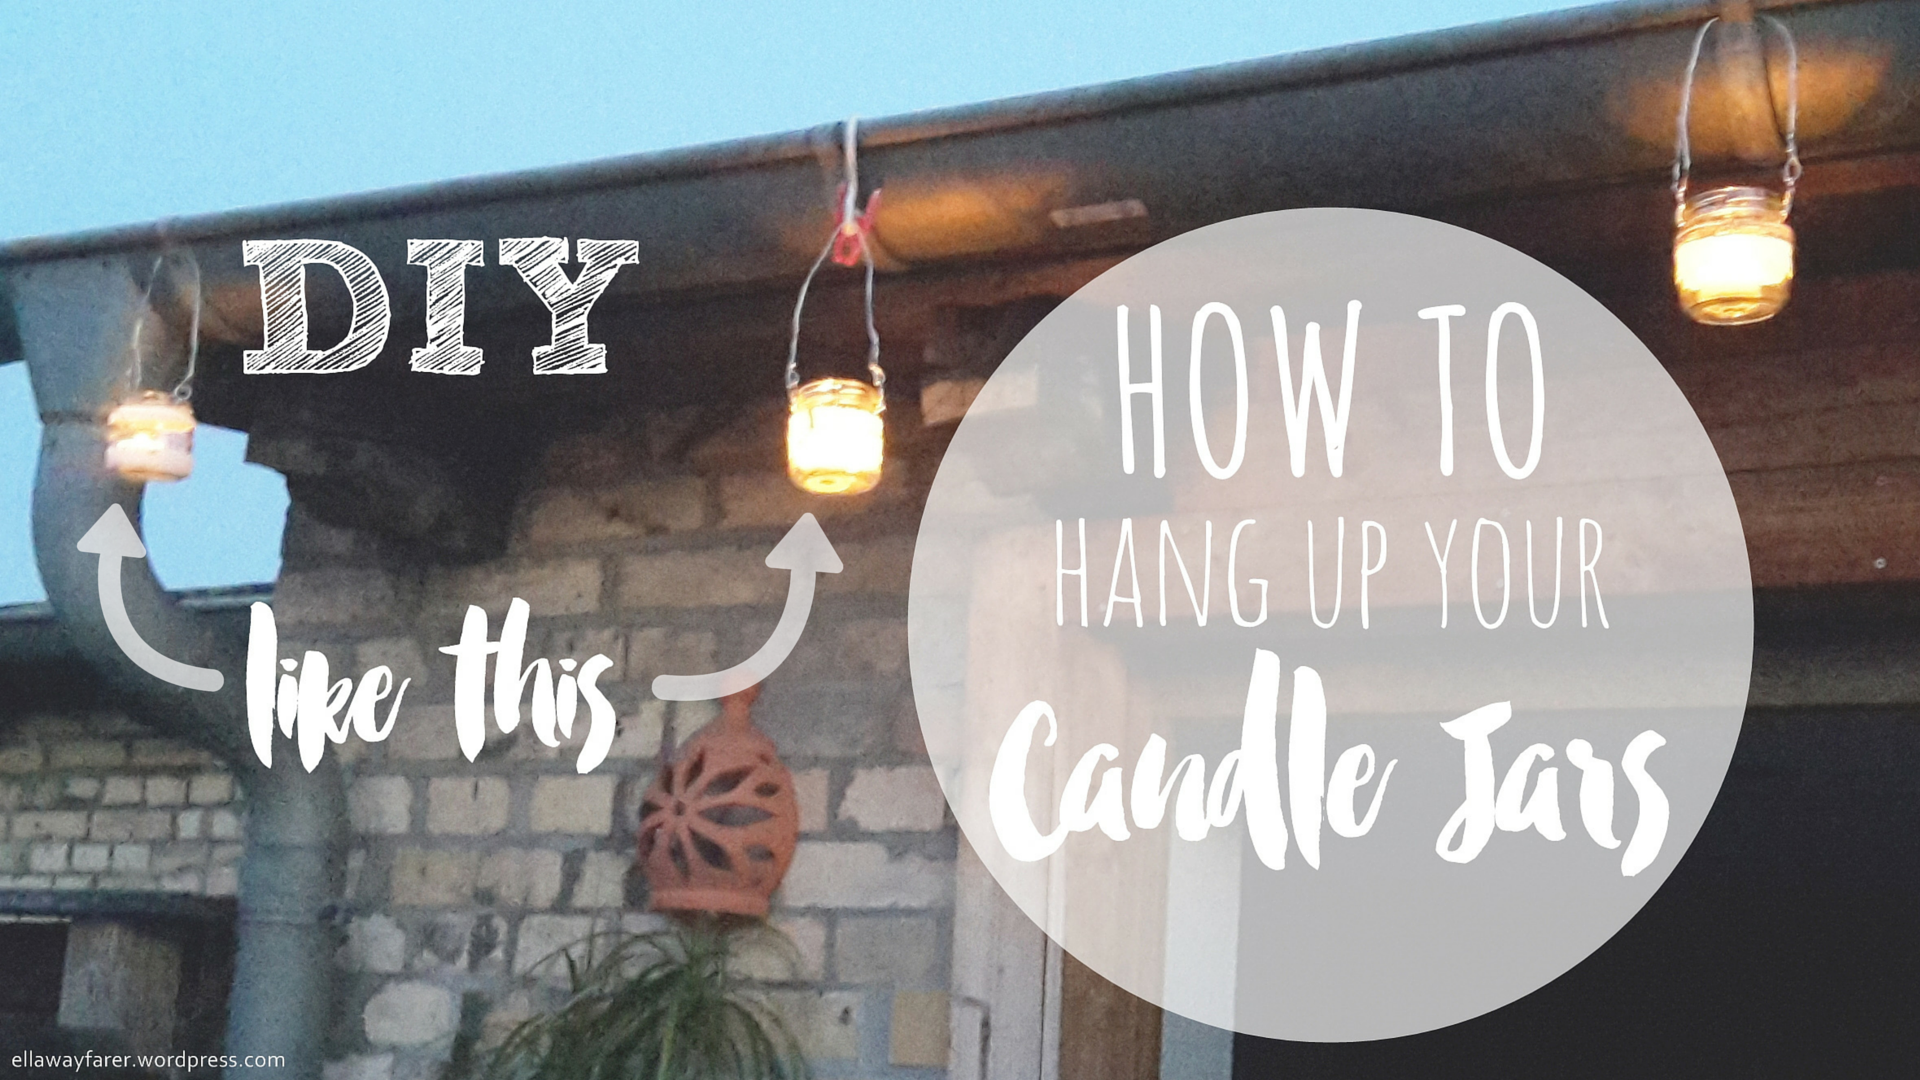 HOW TO HANG UP JARS